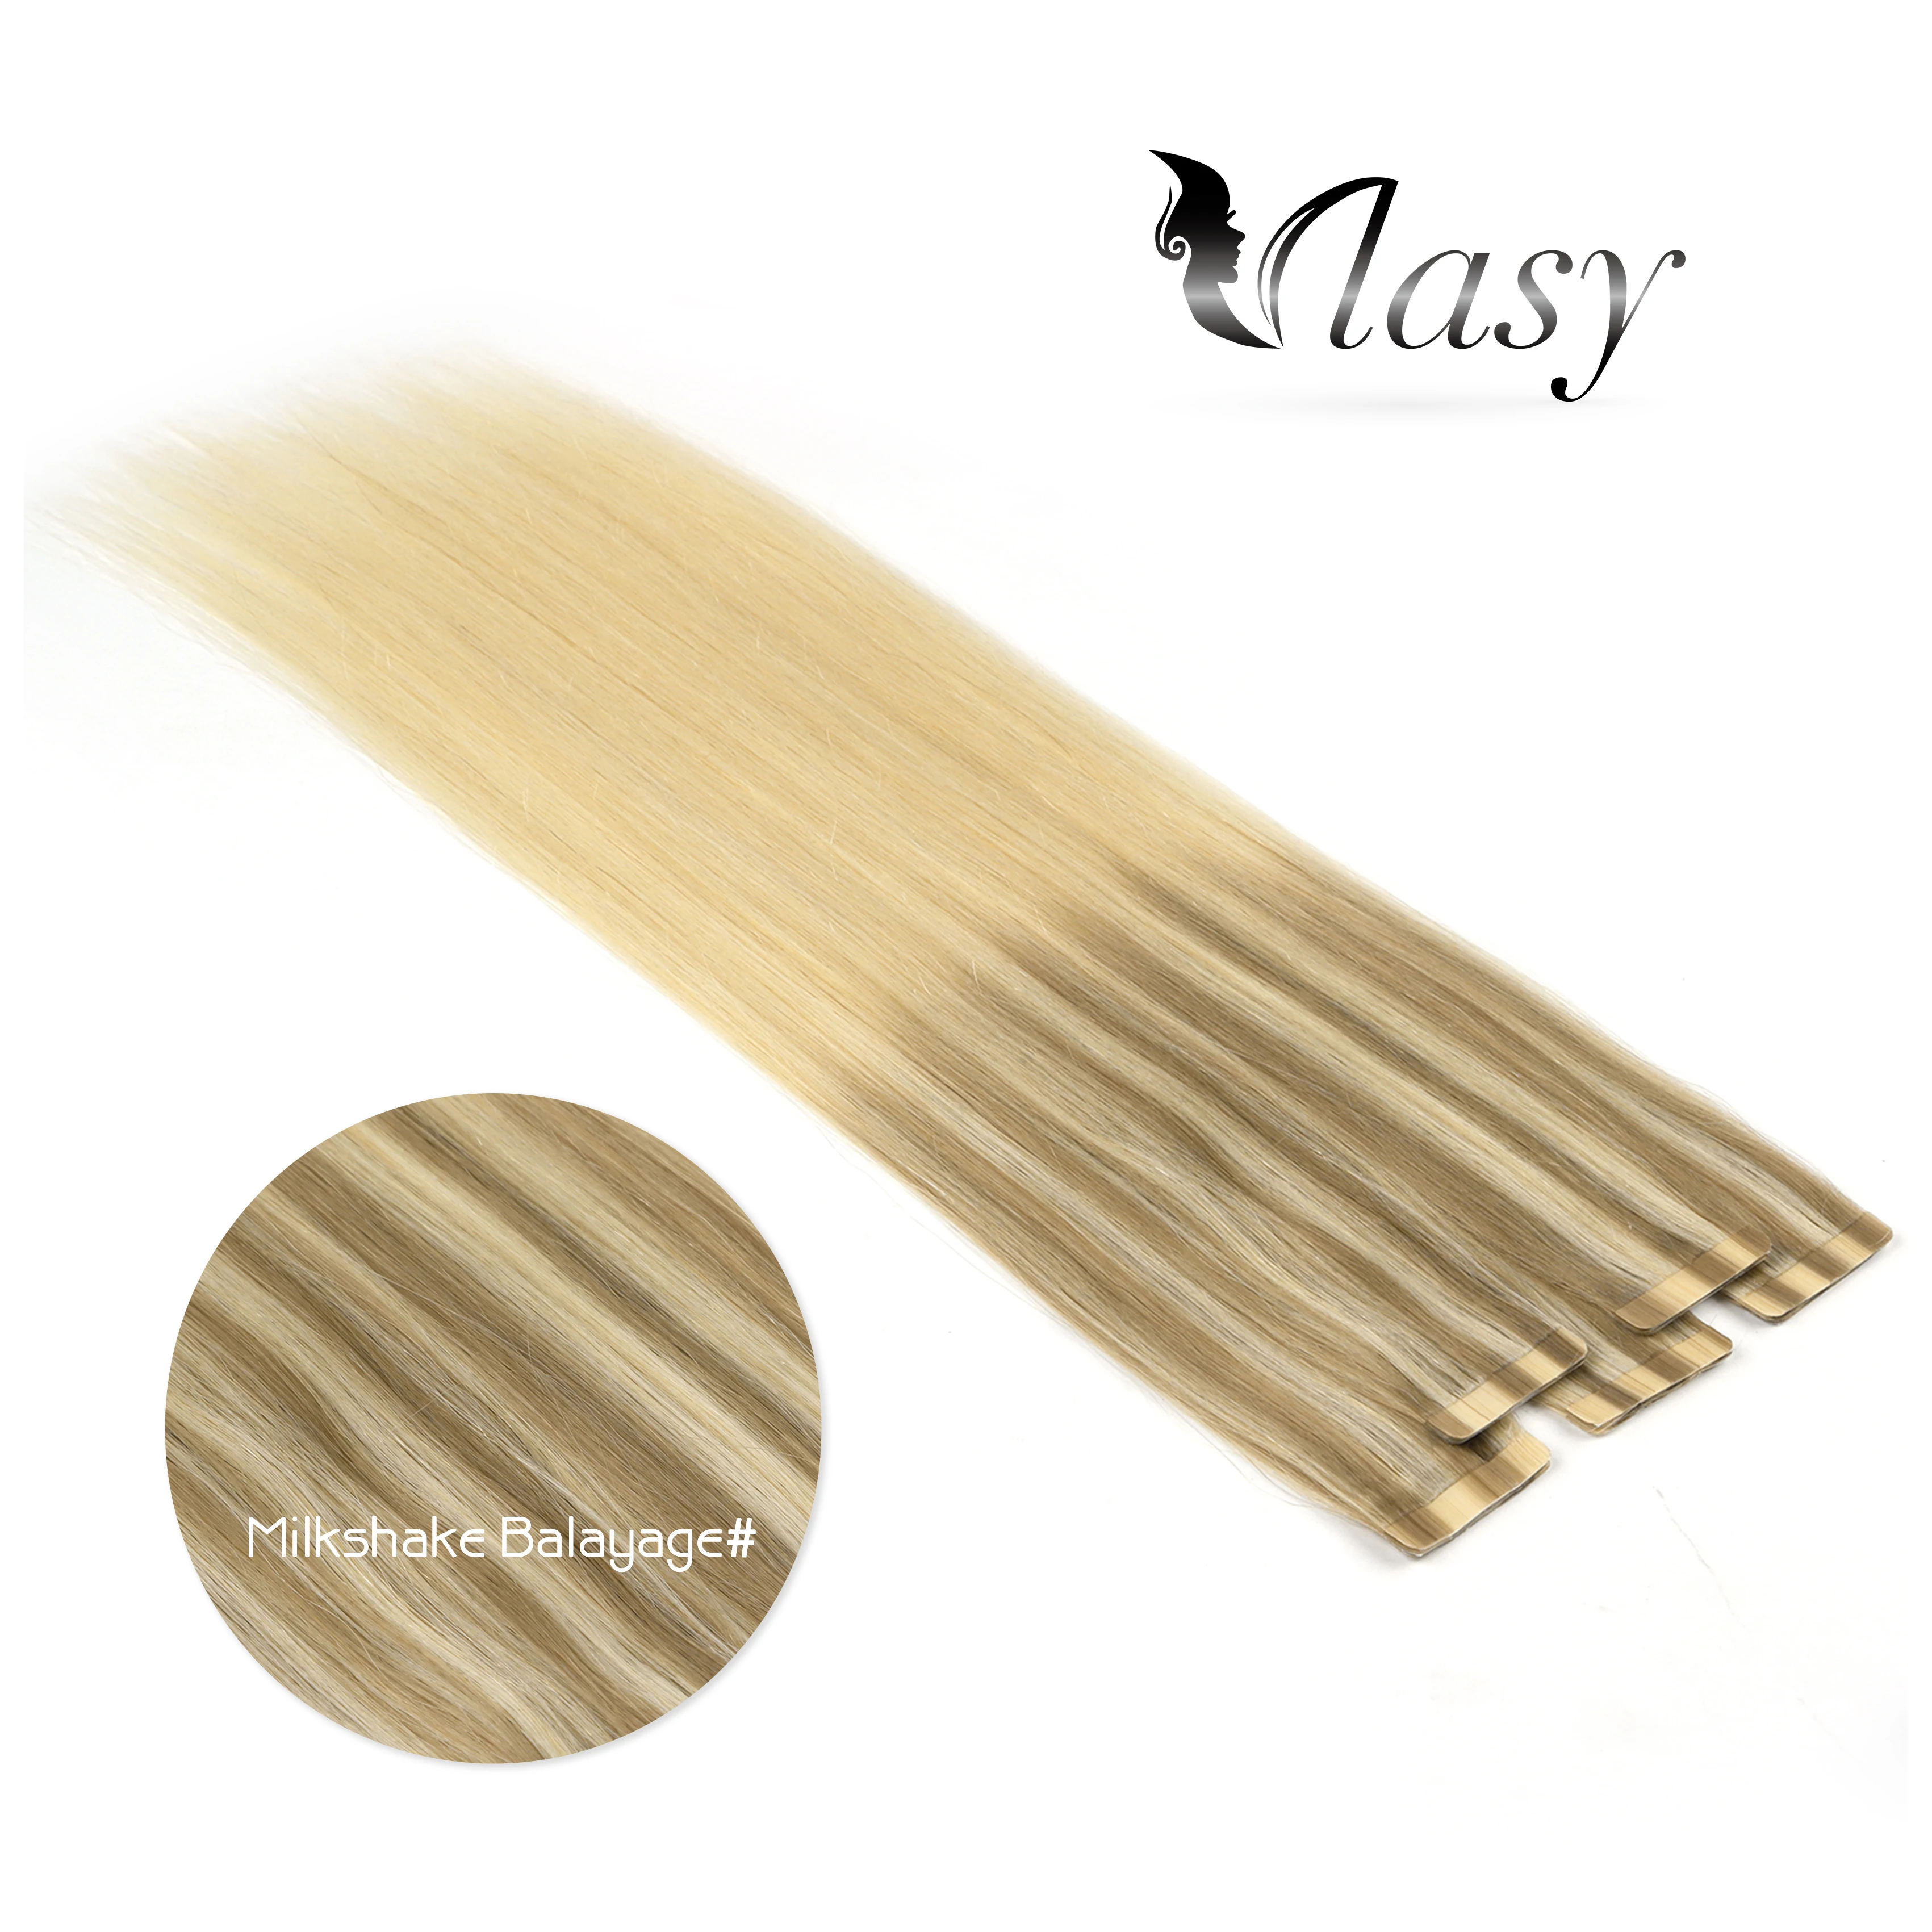 Vlasy 20'' Double Drawn Skin Weft Hair Extensions Brown Mix Blonde Remy Glue on Hair Extensions Milkshake Balayage Color 2.5g/pc